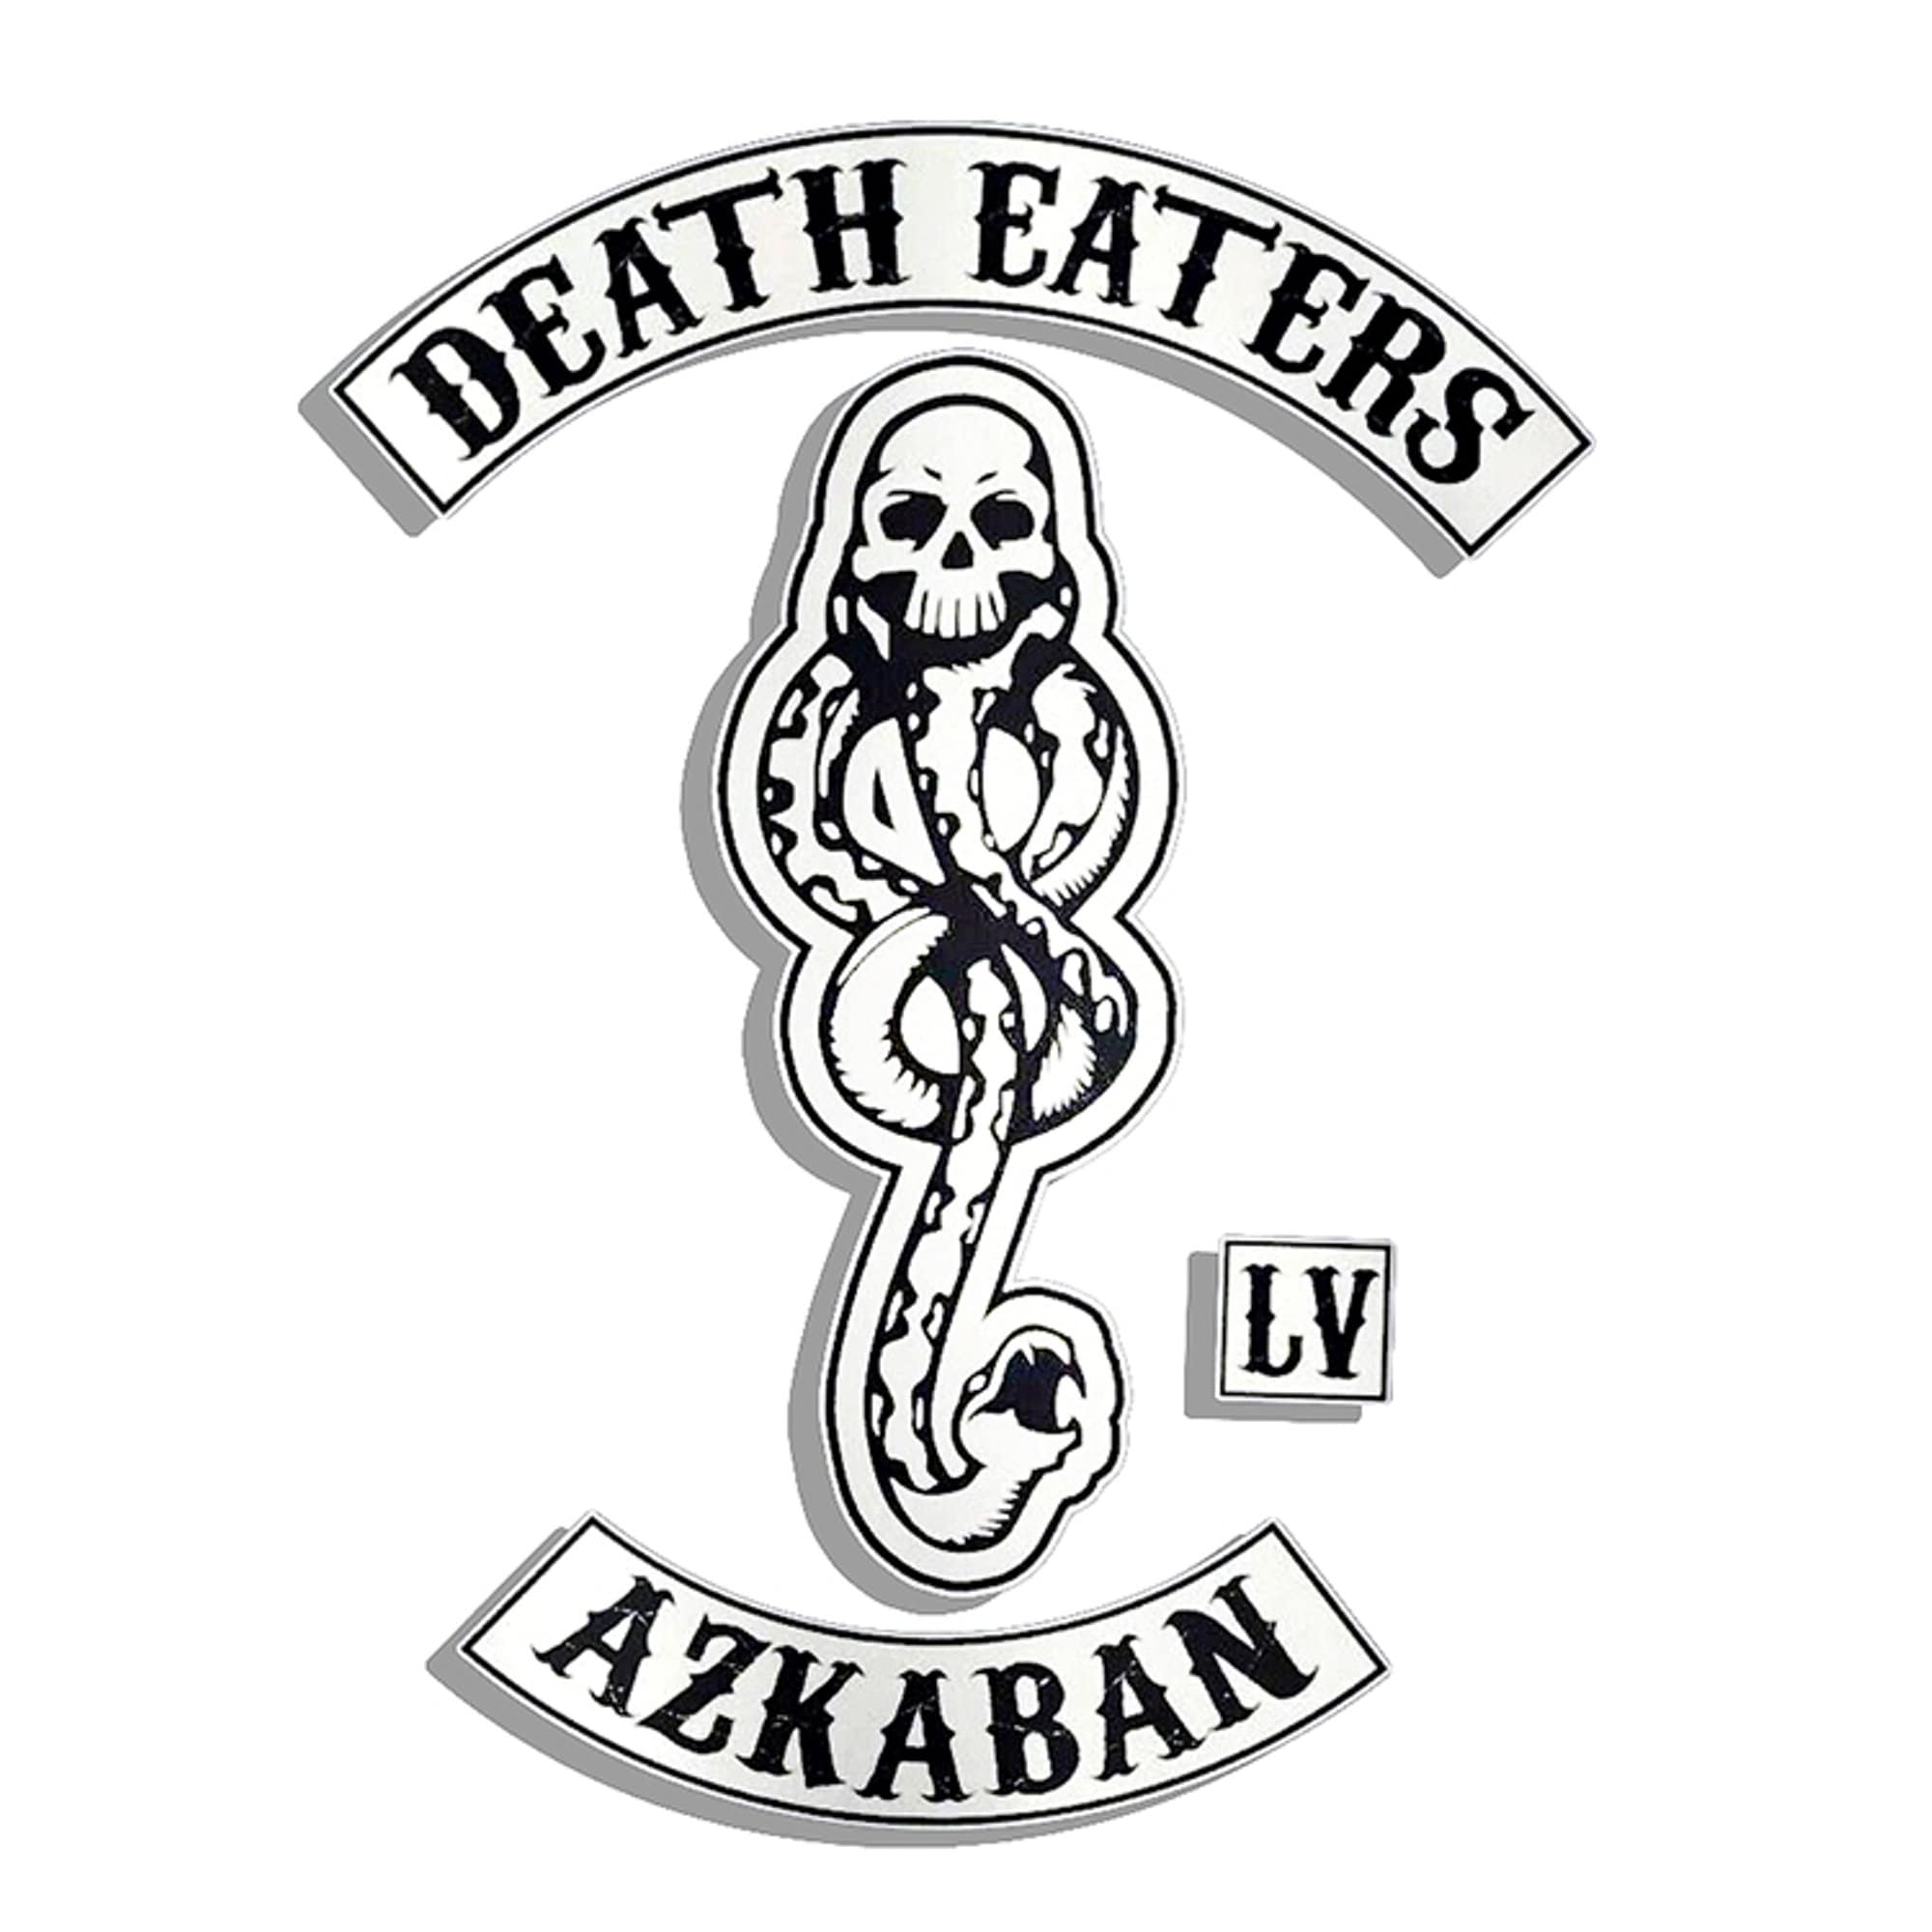 Death Eater Azakaban Lv Embroidered Patches Set of 3 Pcs Iron 